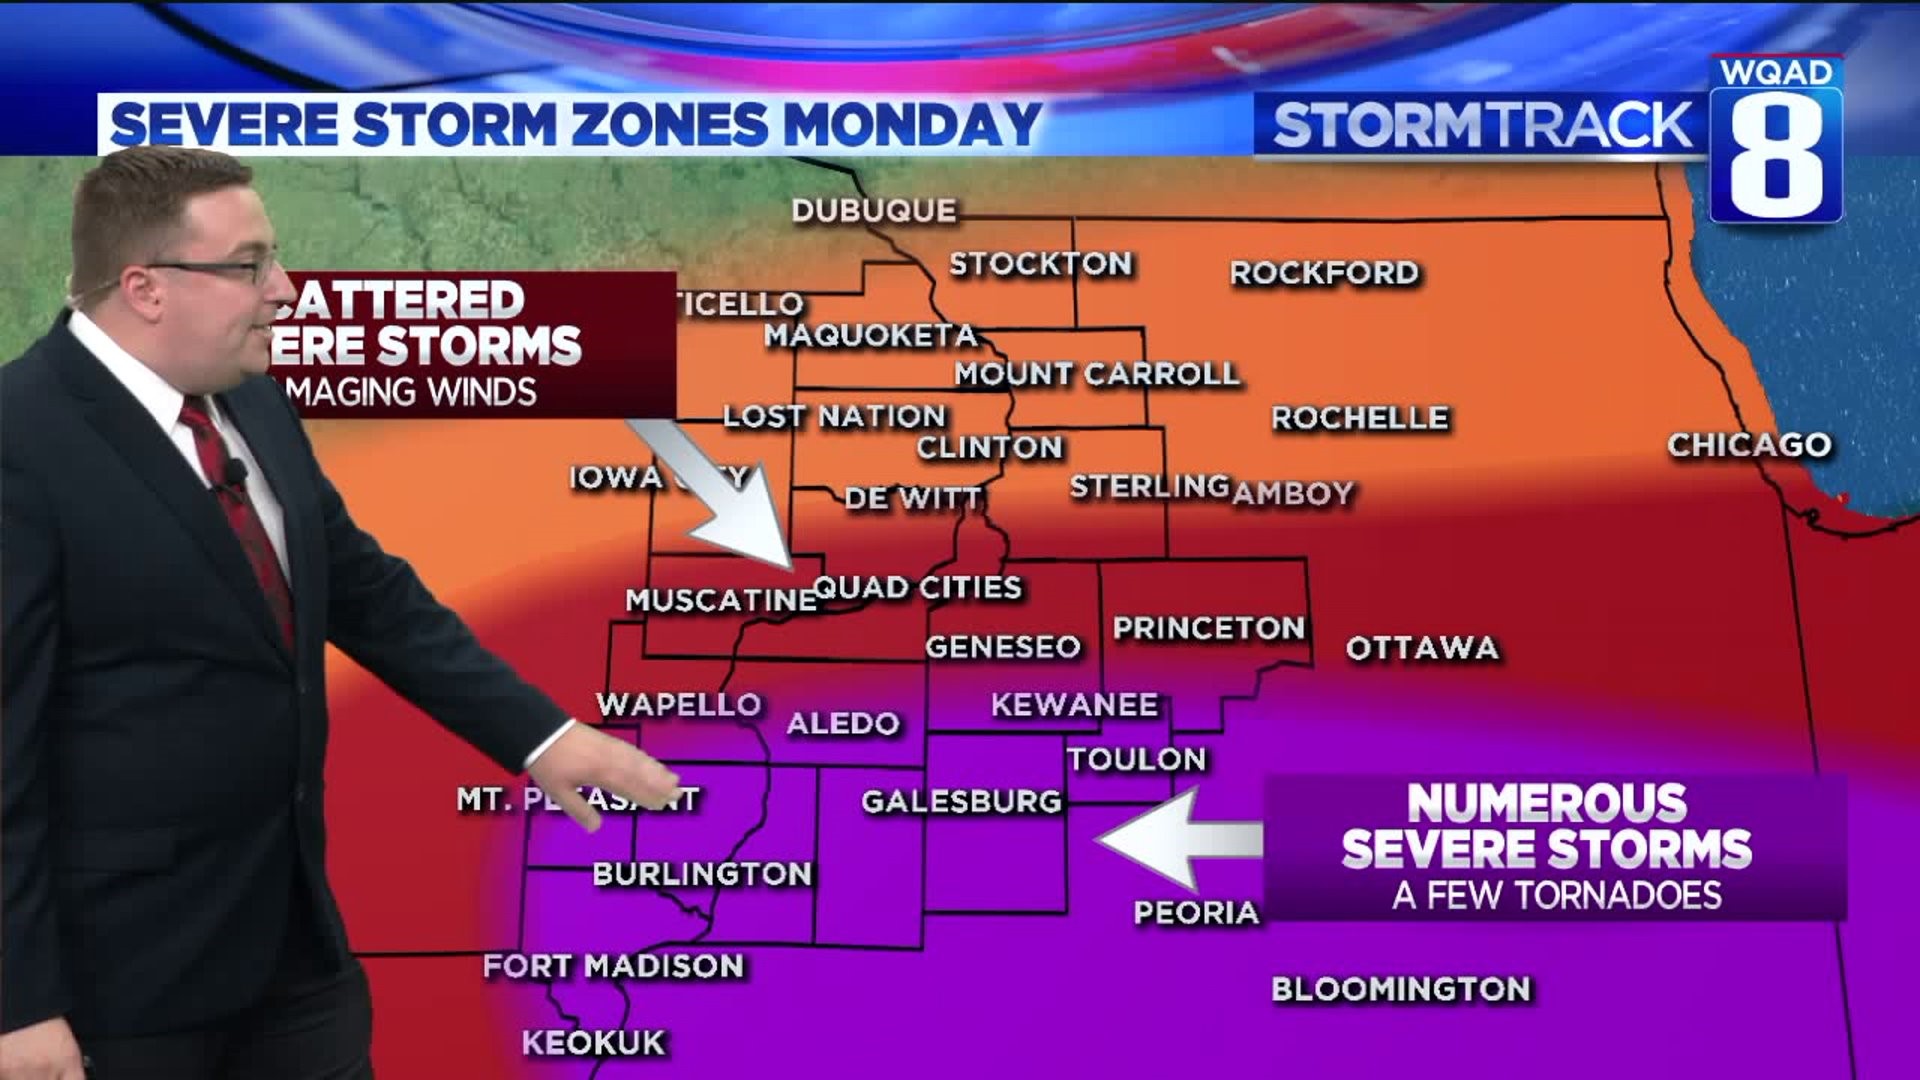 Tracking a few strong storms for Monday